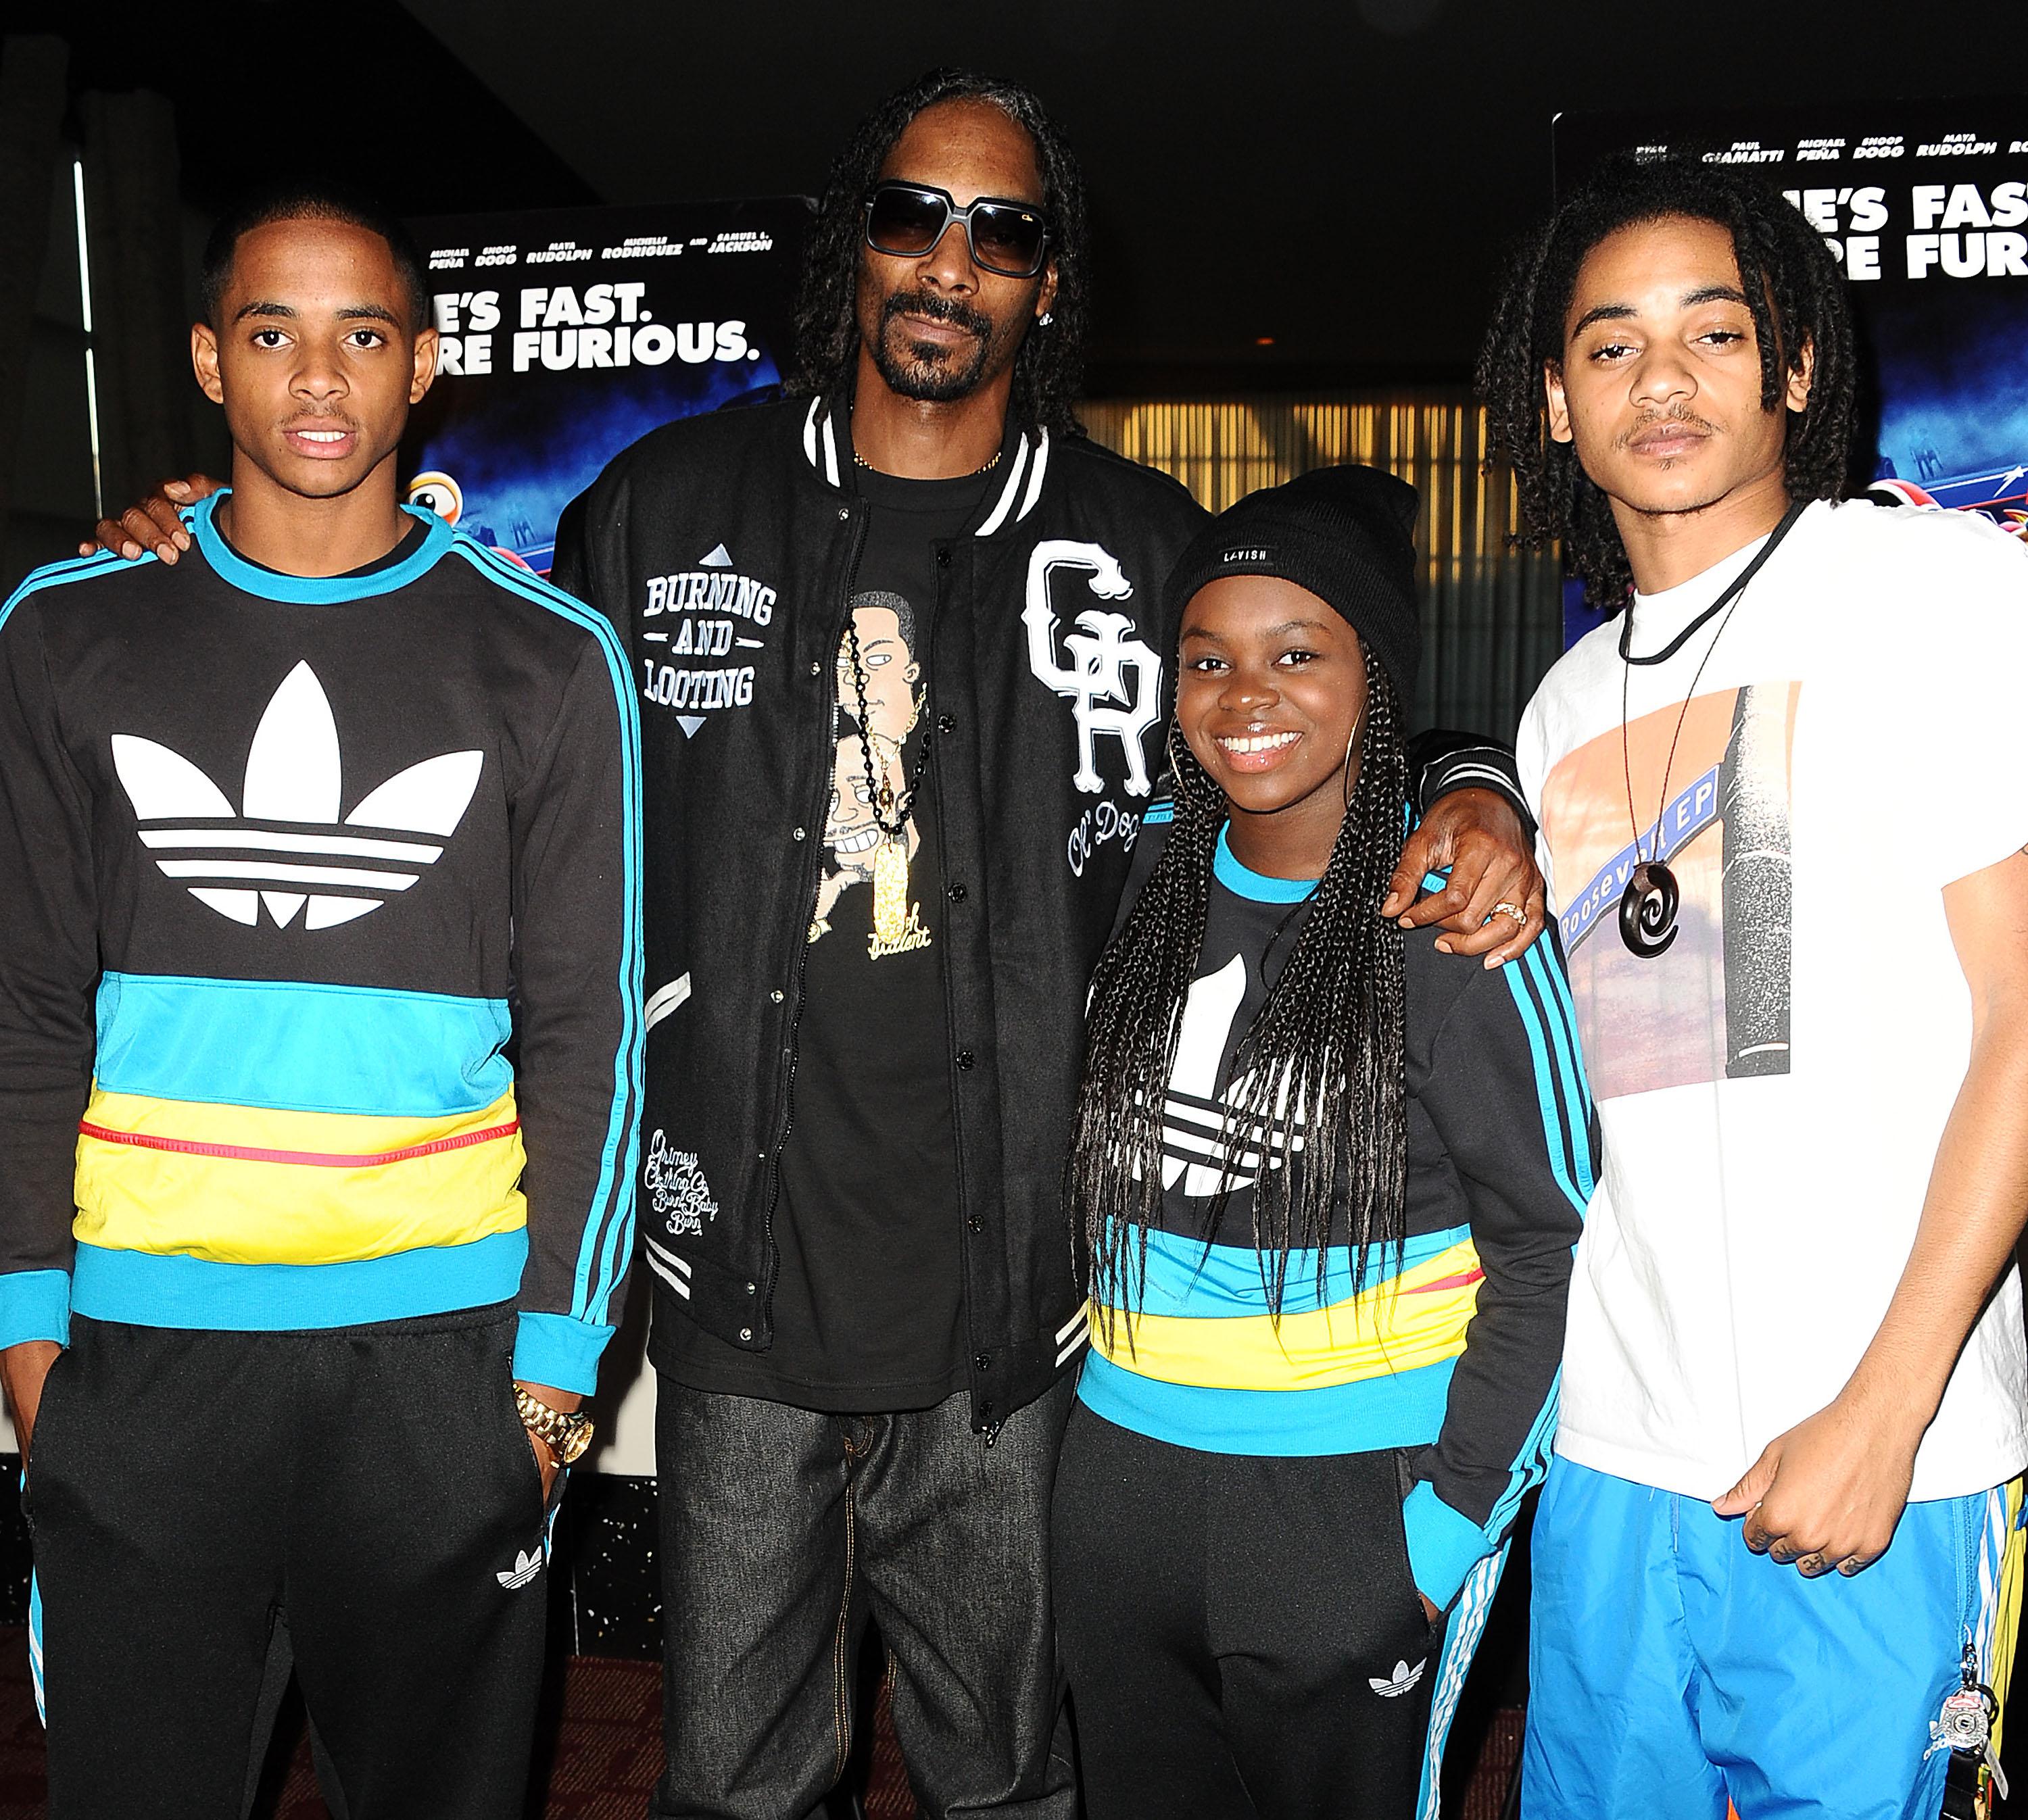 Snoop Dogg’s Baby Grandson Tragically Dies In The Hospital At Only 10-Days Old